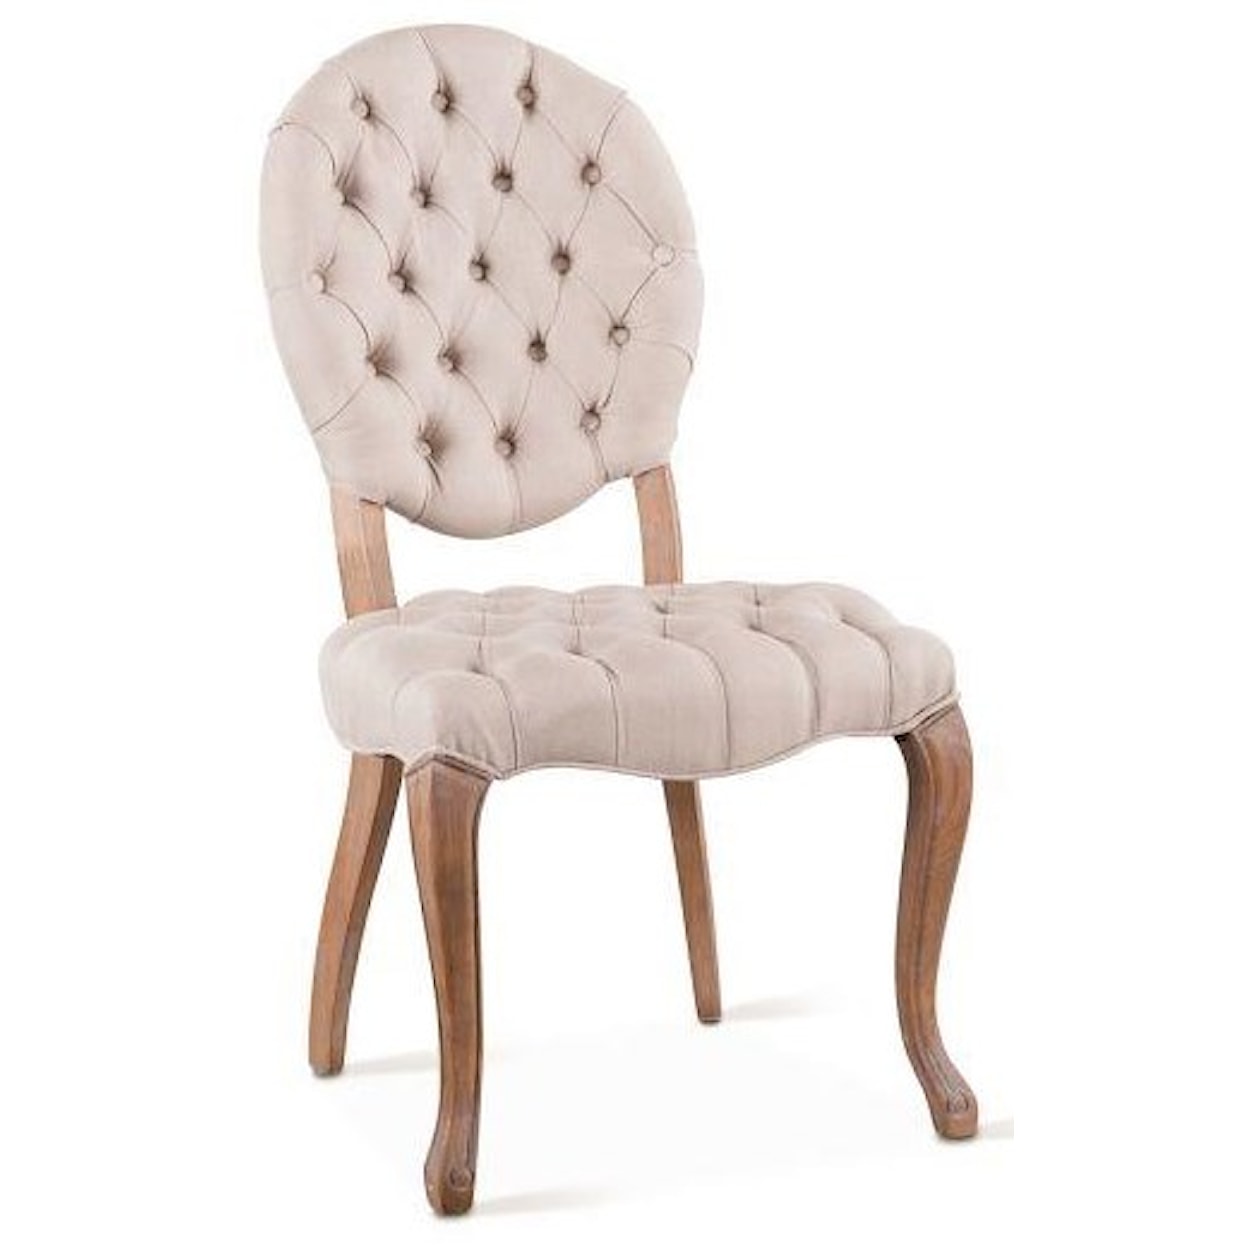 BeGlobal Penelope Tufted Dining Chair